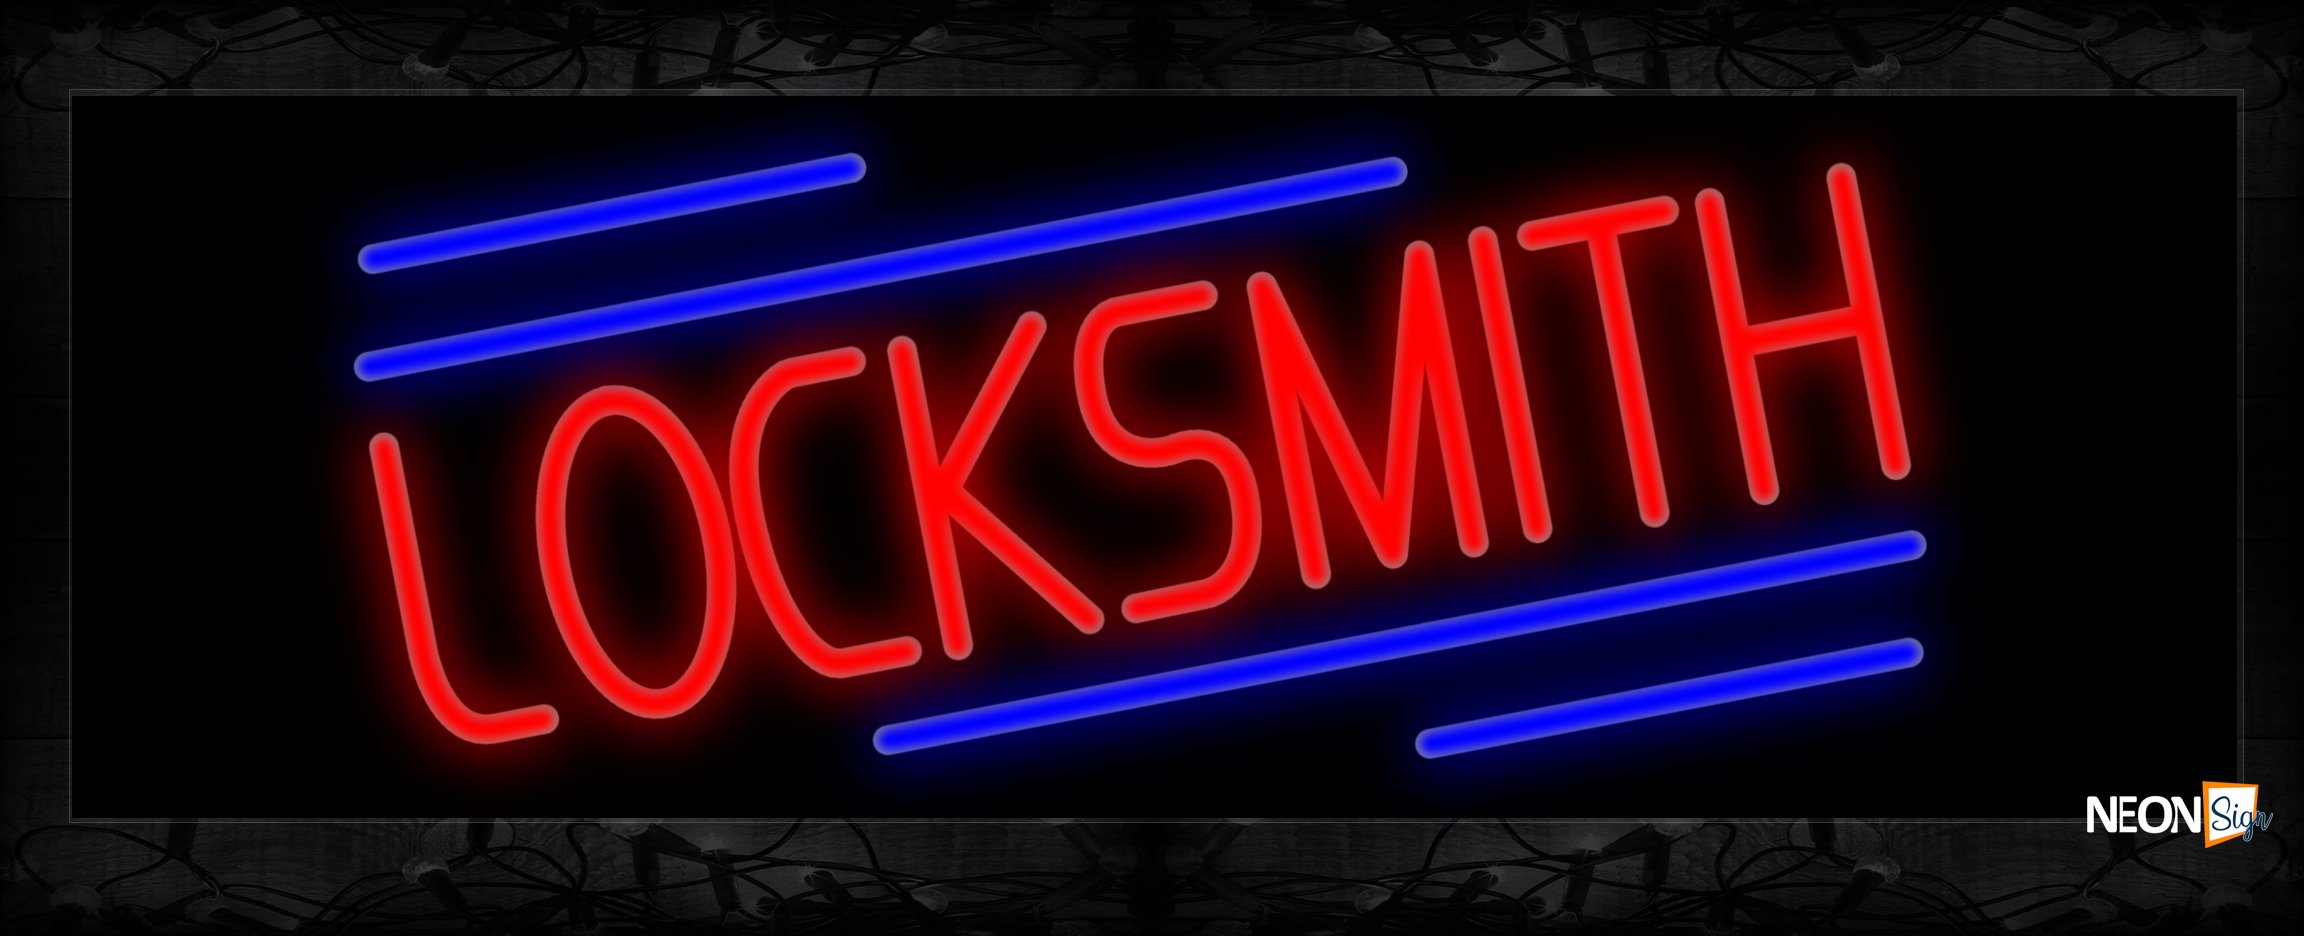 Image of 10826 Locksmith with blue lines Neon Sign 13x32 Black Backing